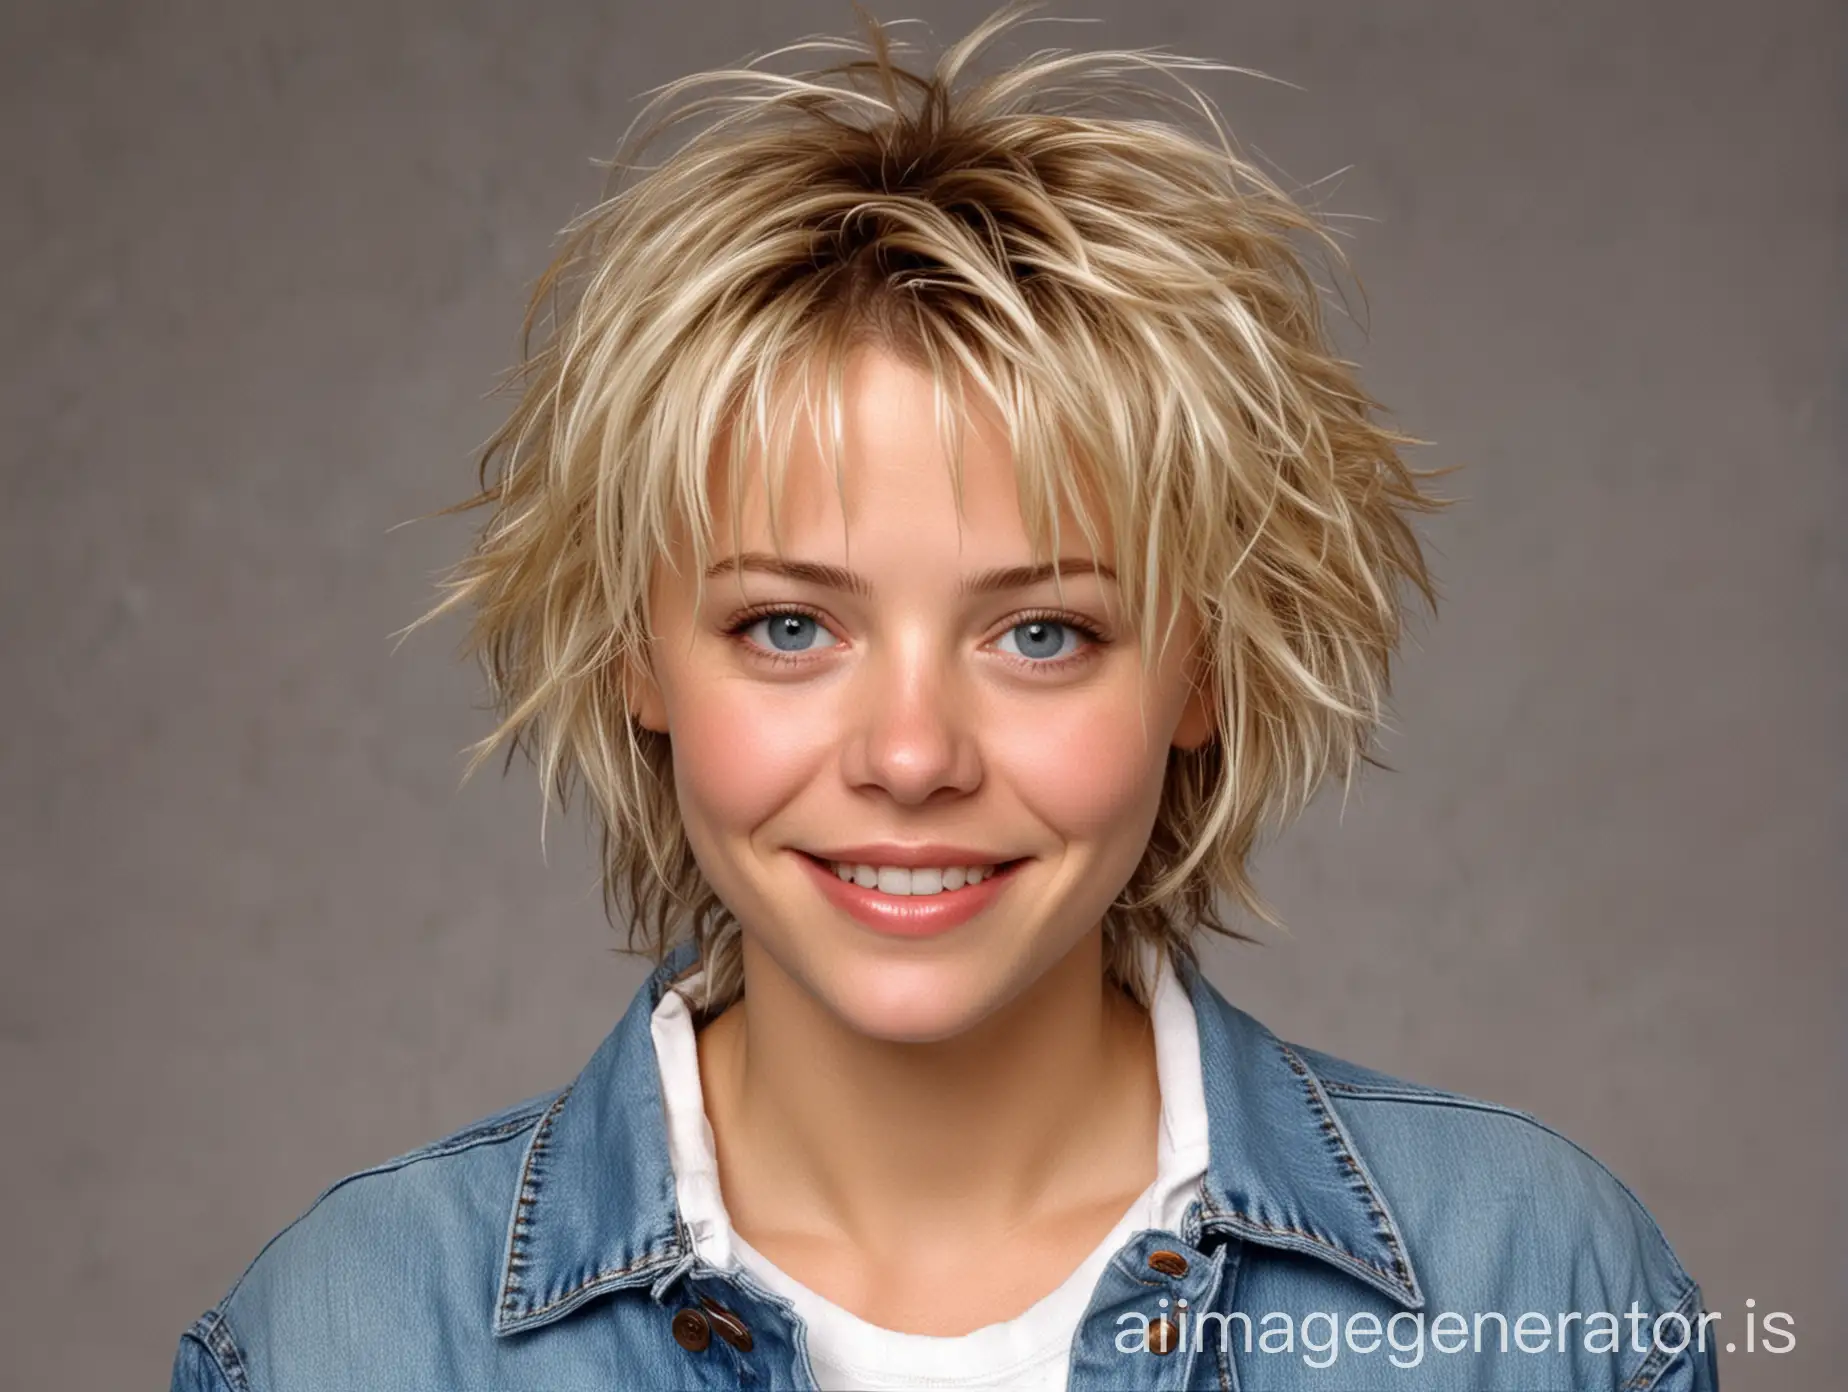 Attractive woman, 20 years old. Very short blonde tousled scruffy hair,  cheeky grinning face, crystal blue eyes, wearing Jeans, white T-shirt jumper and blue jacket. Looks a bit like Meg Ryan.
